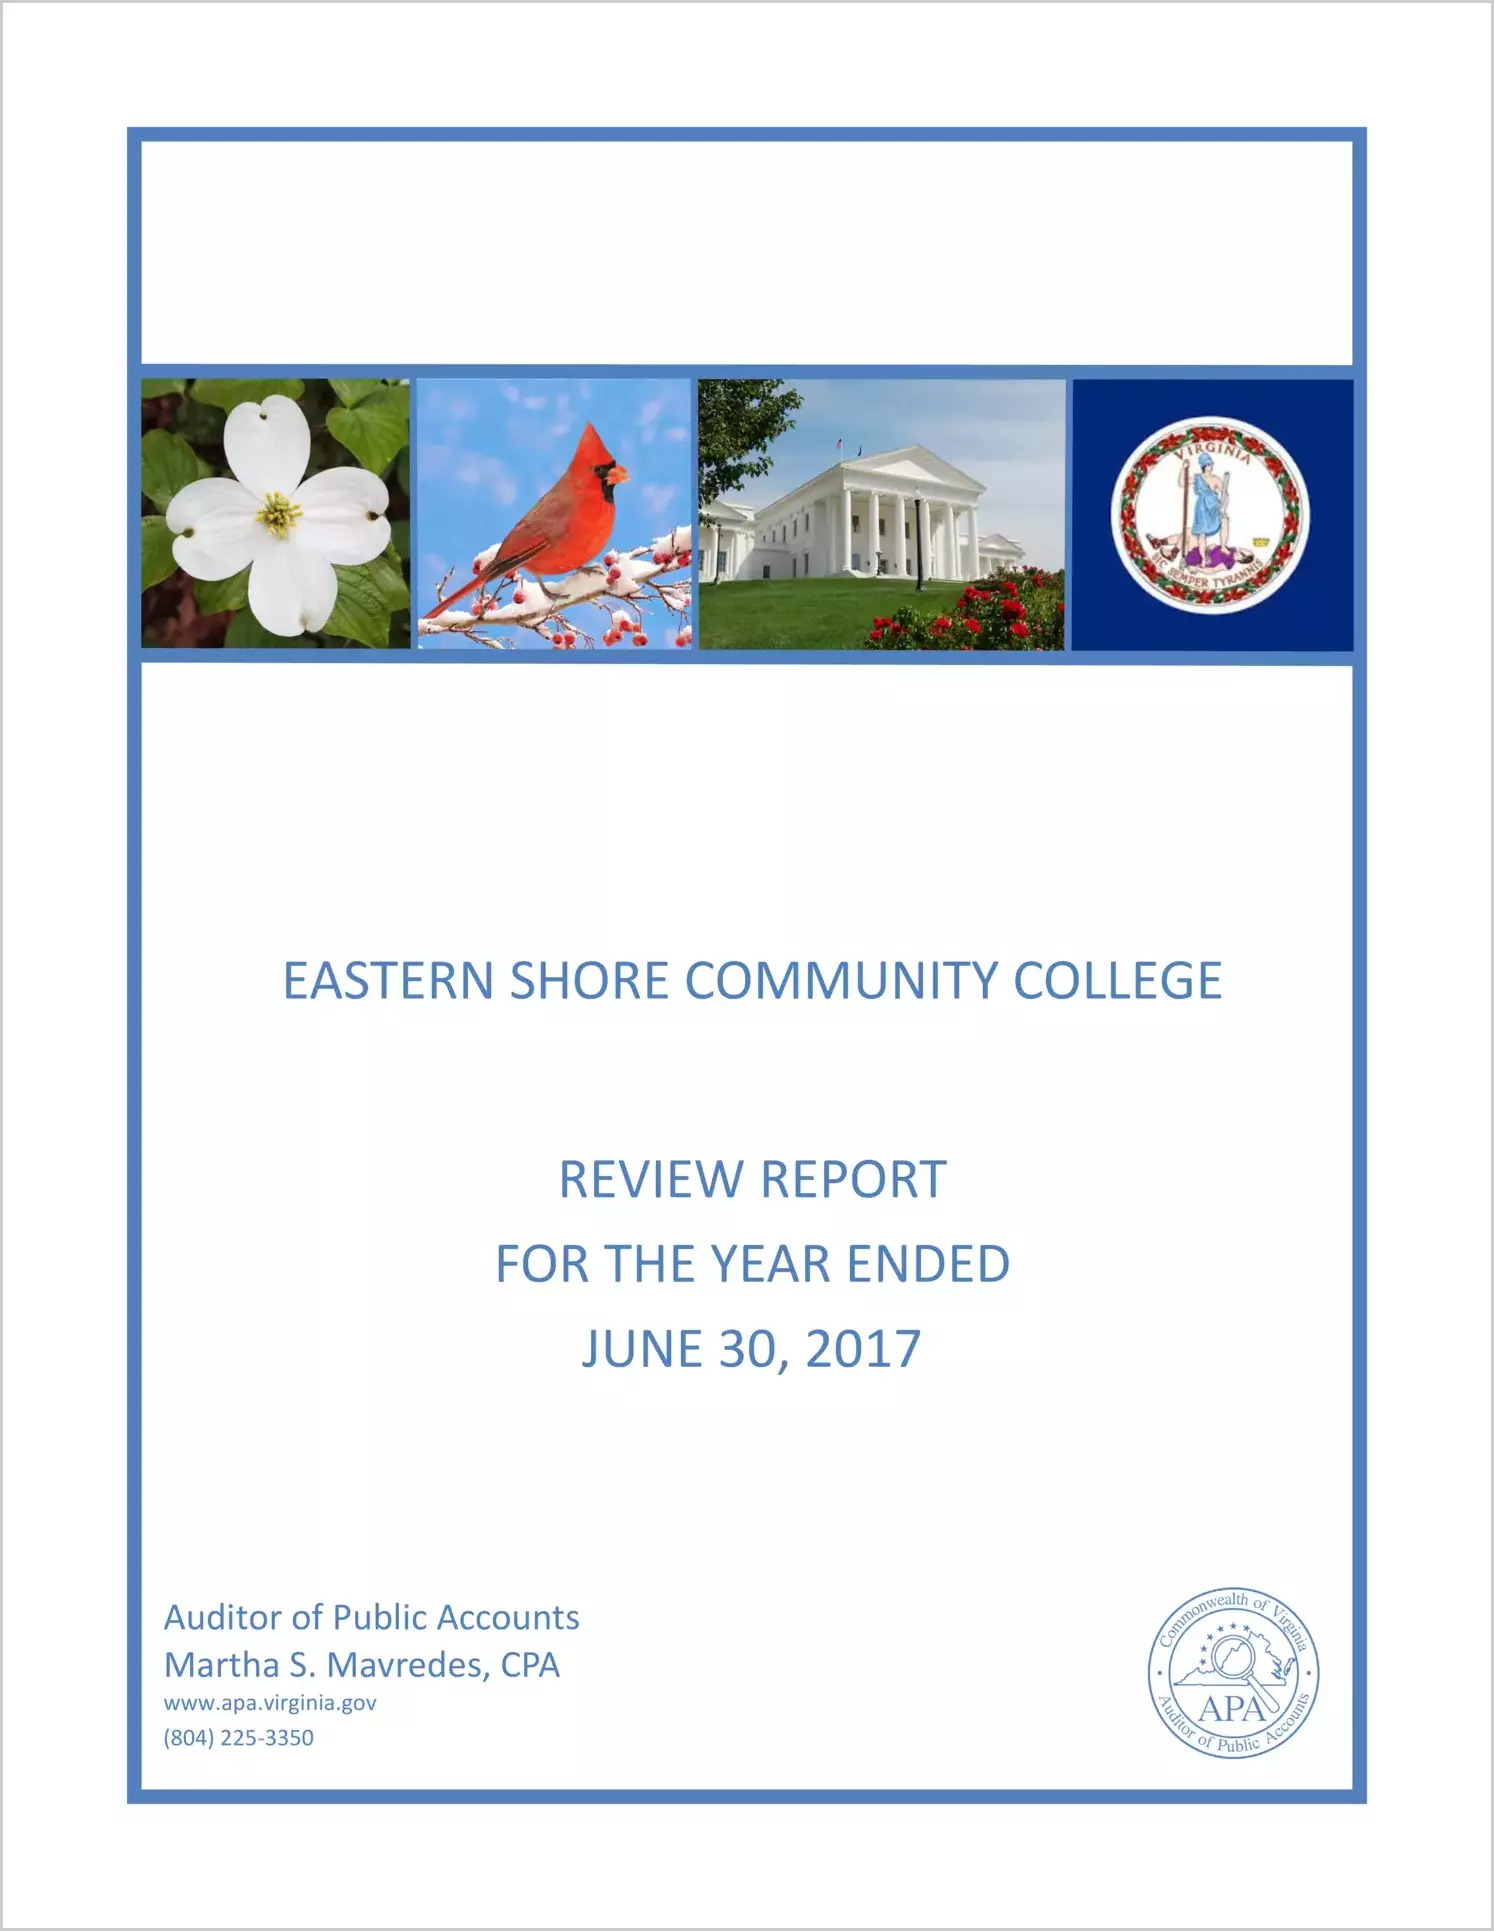 Eastern Shore Community College review report for the year ended June 30, 2017